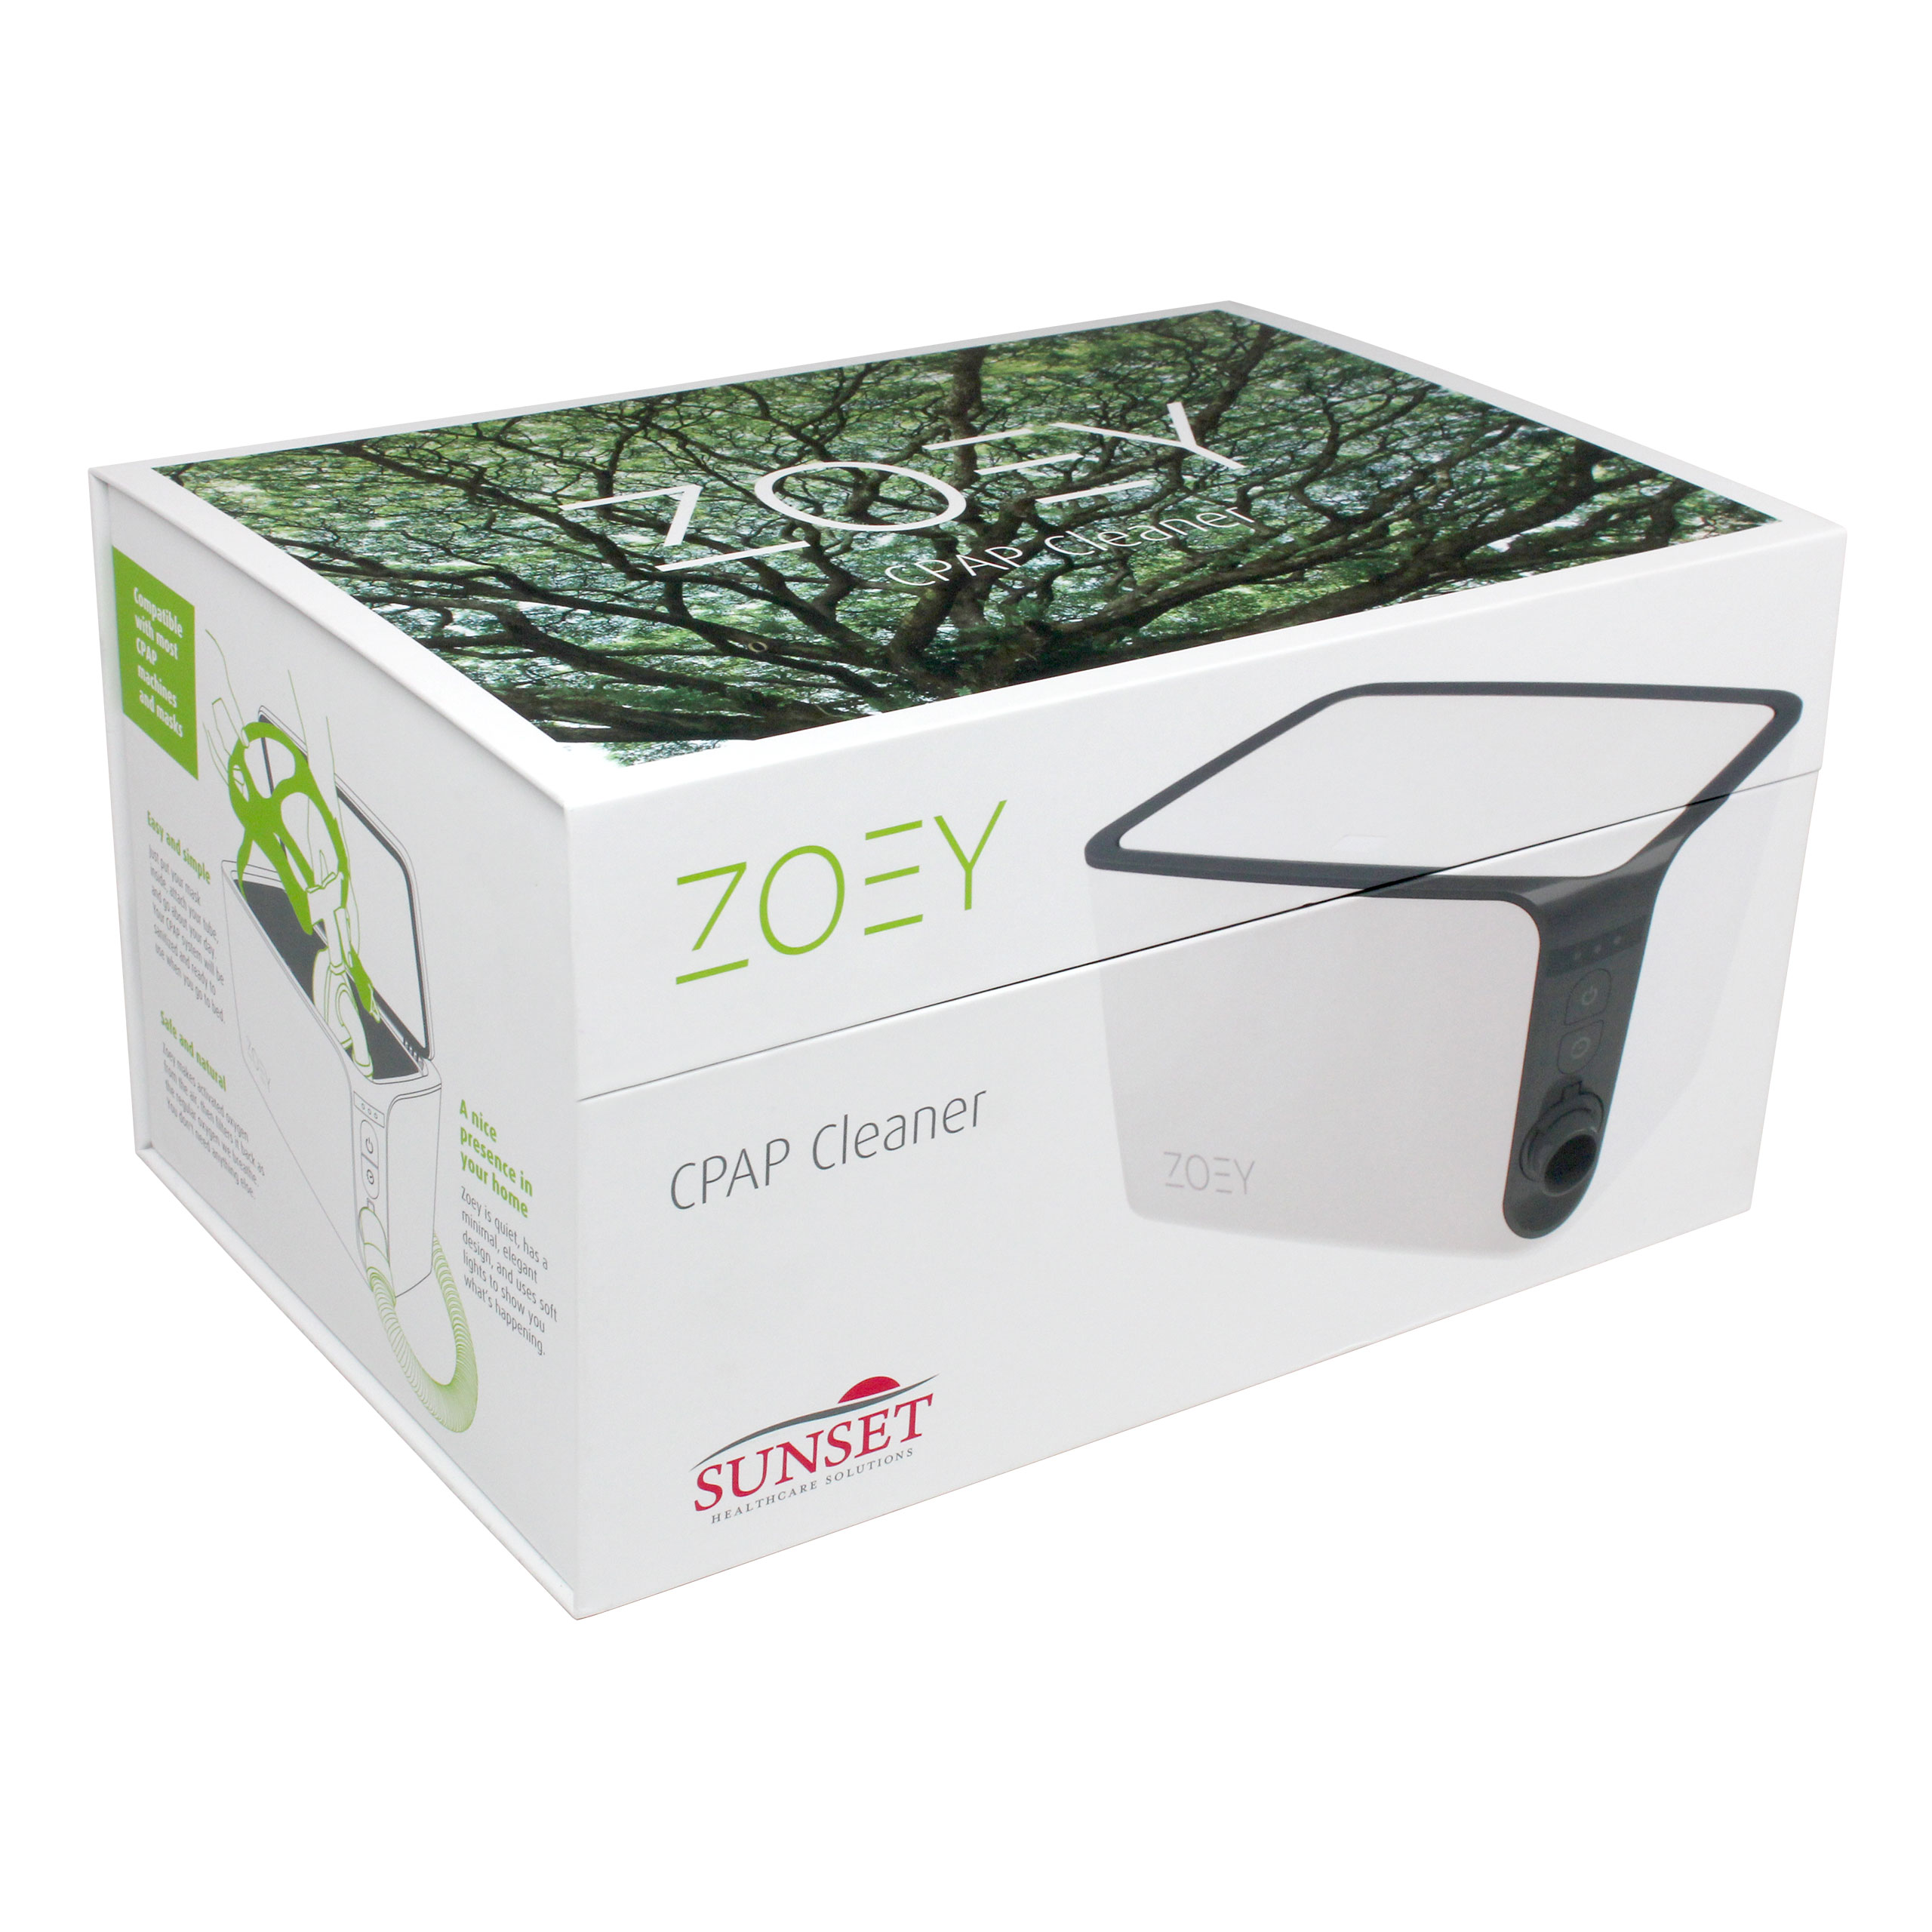 Zoey CPAP Cleaner retail box